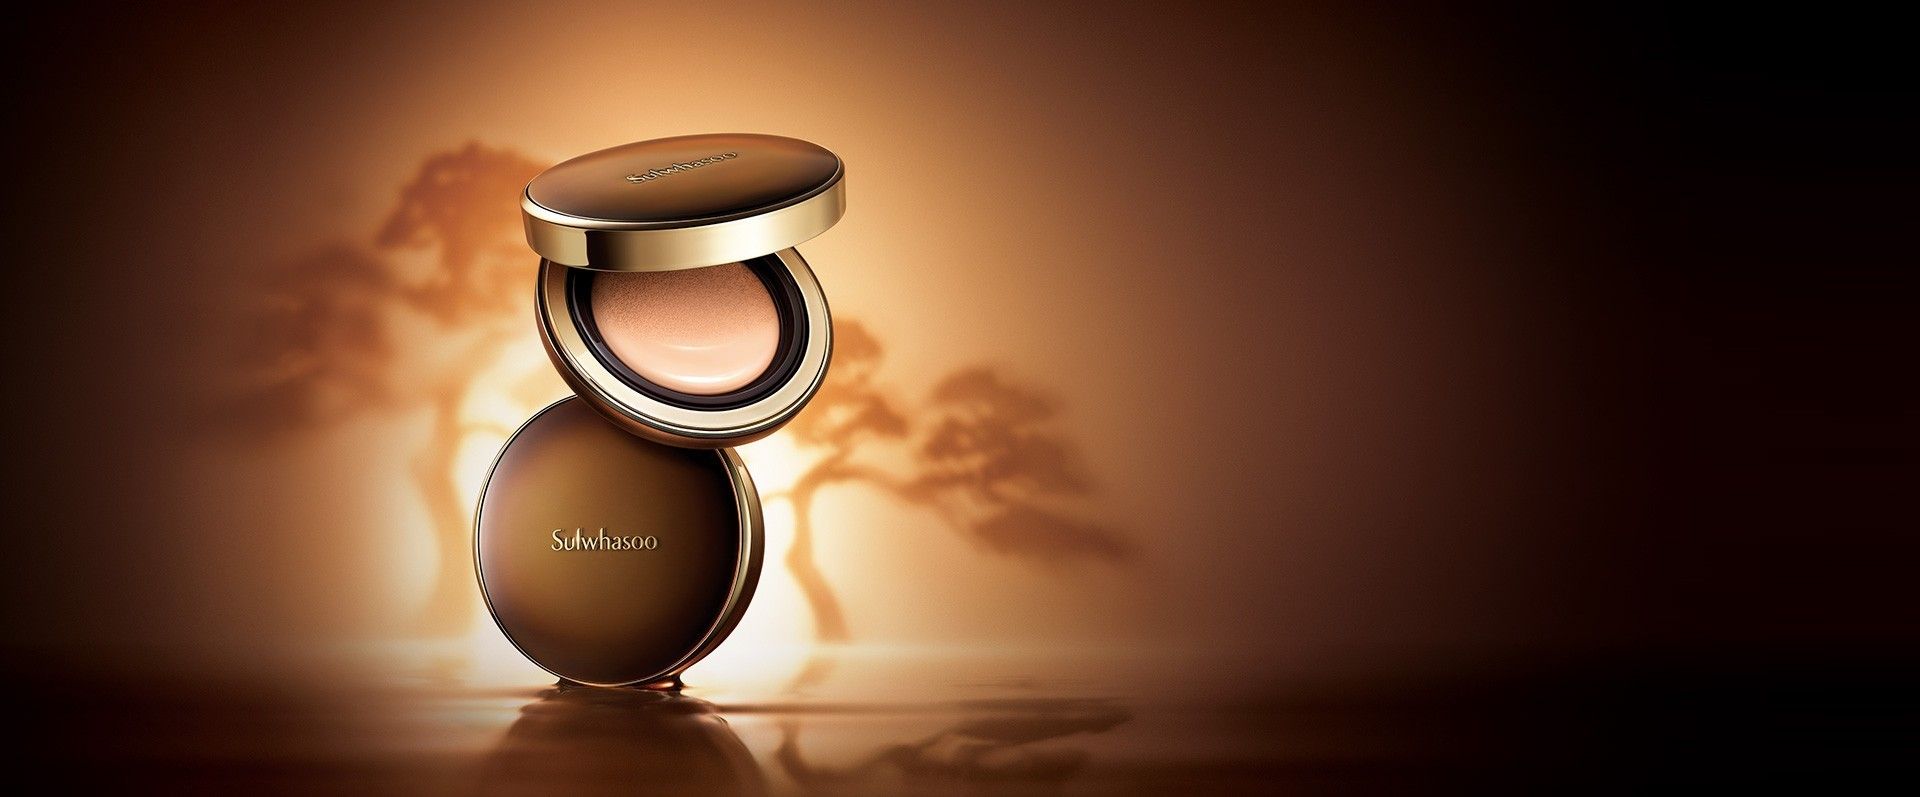 Face test: Sulwhasoo Perfecting Cushion Intense review